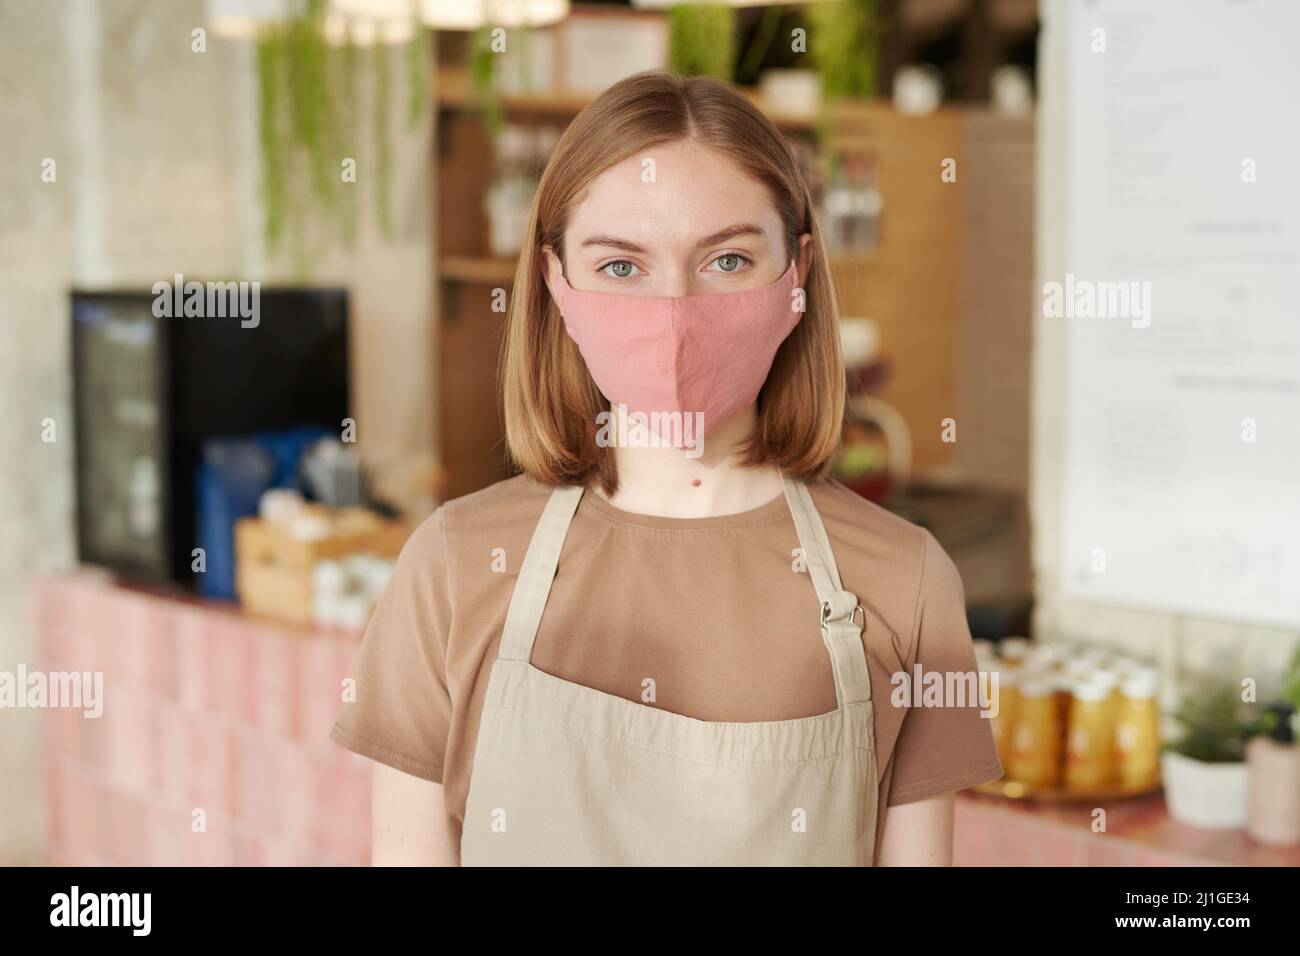 Horizontal medium close-up portrait of young woman wearing apron and protective mask starting workday in cafe looking at camera Stock Photo